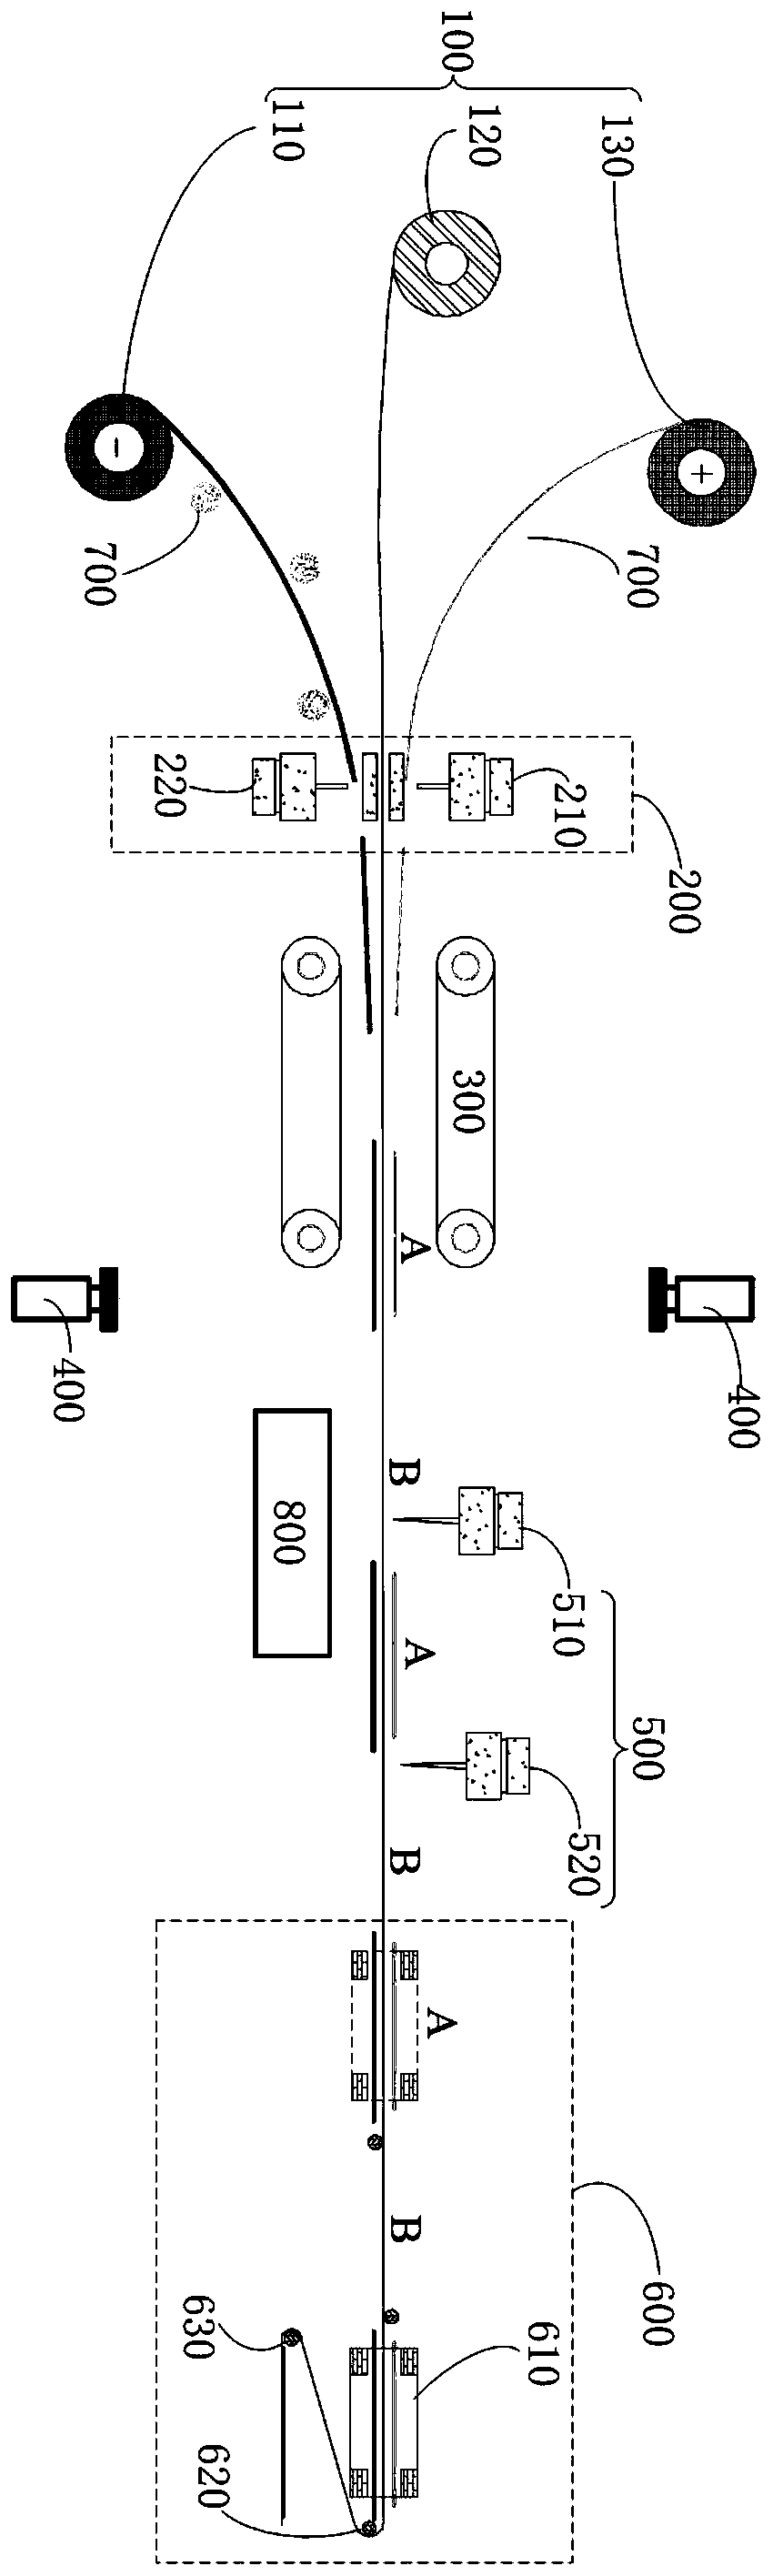 Die-cutting lamination system and method